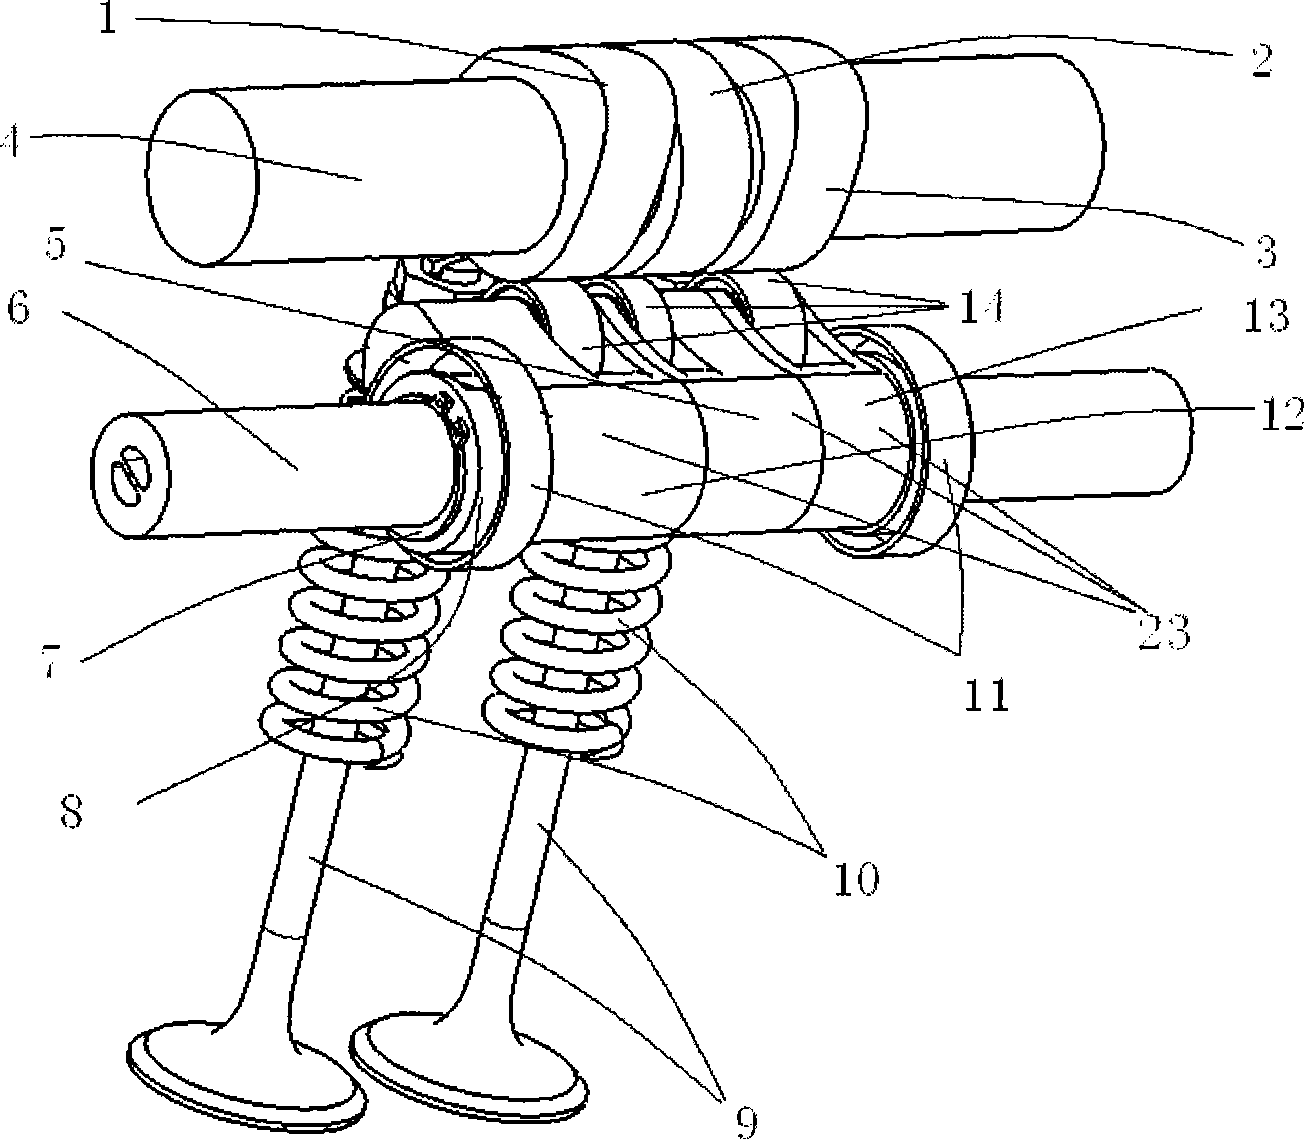 Engine variable valve lift mechanism capable of implementing vat destruction function and its control method